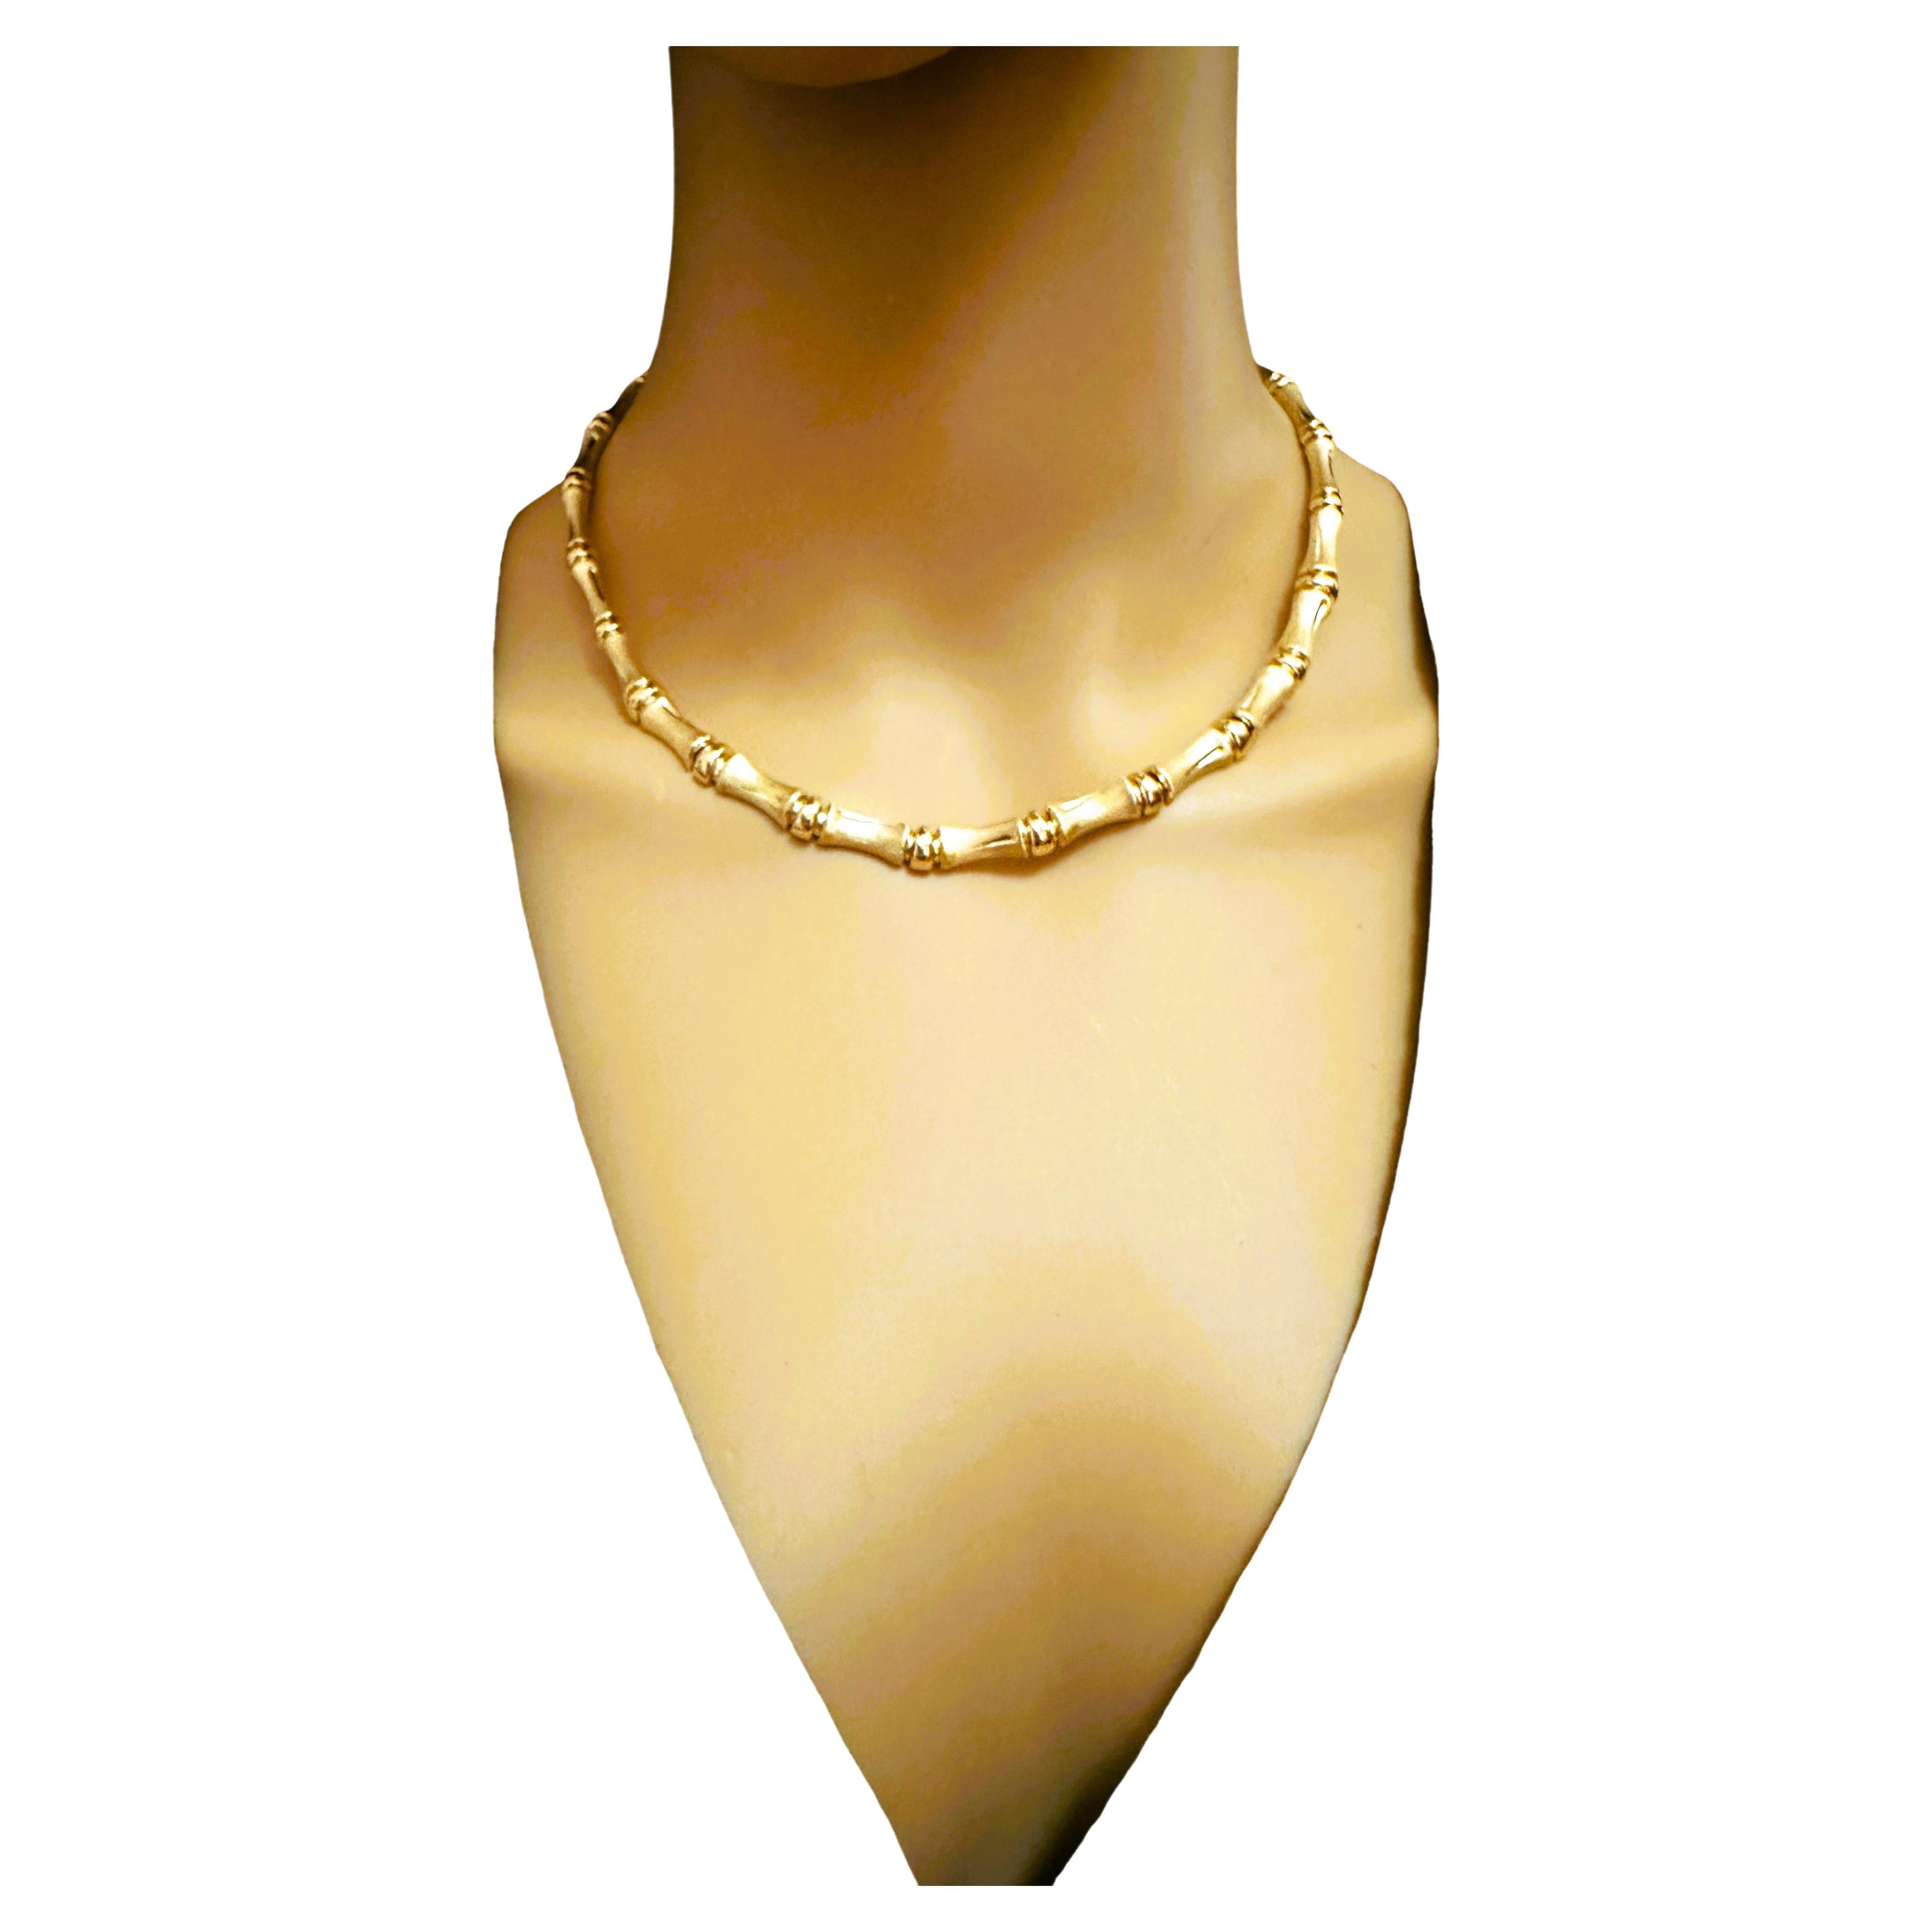 Arpas 14k Yellow Gold Bamboo Link 17" Necklace - 24 Grams